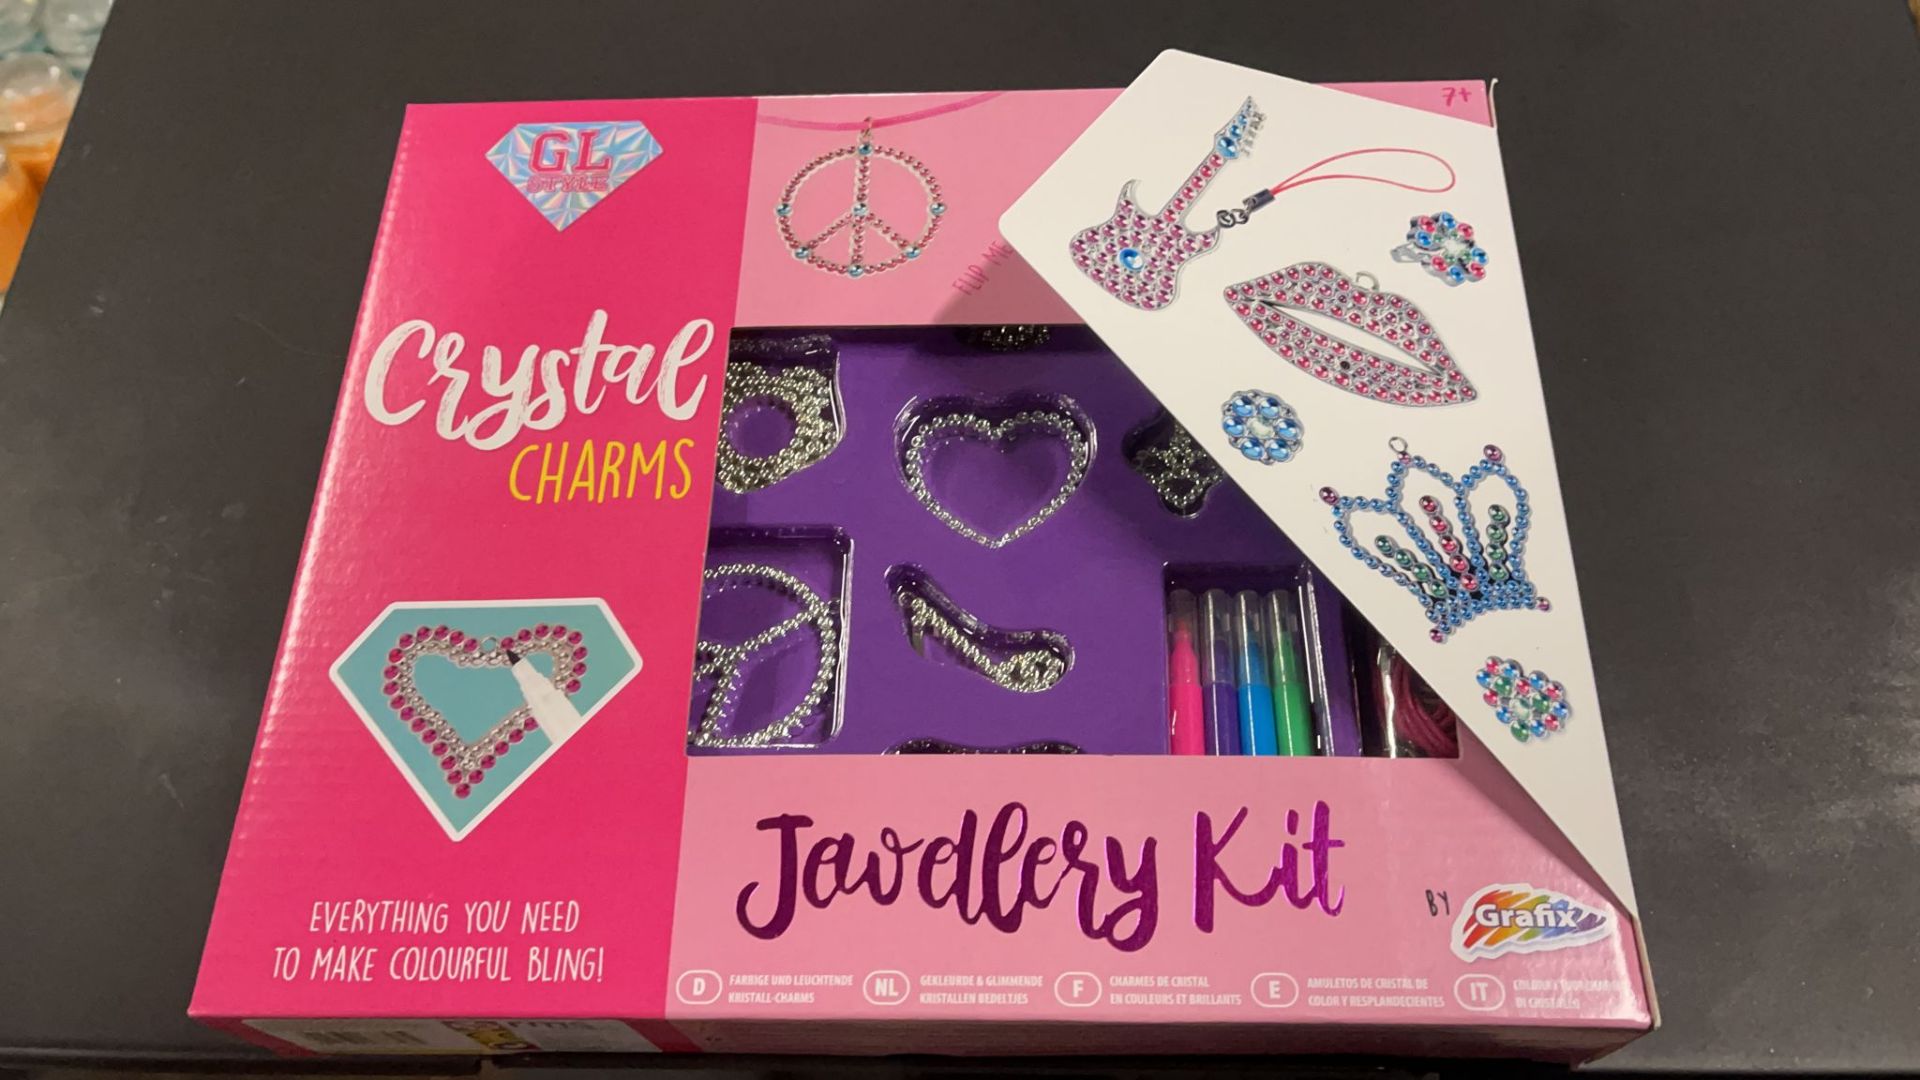 NEW GL STYLE CRYSTAL CHARMS JEWELLERY KIT